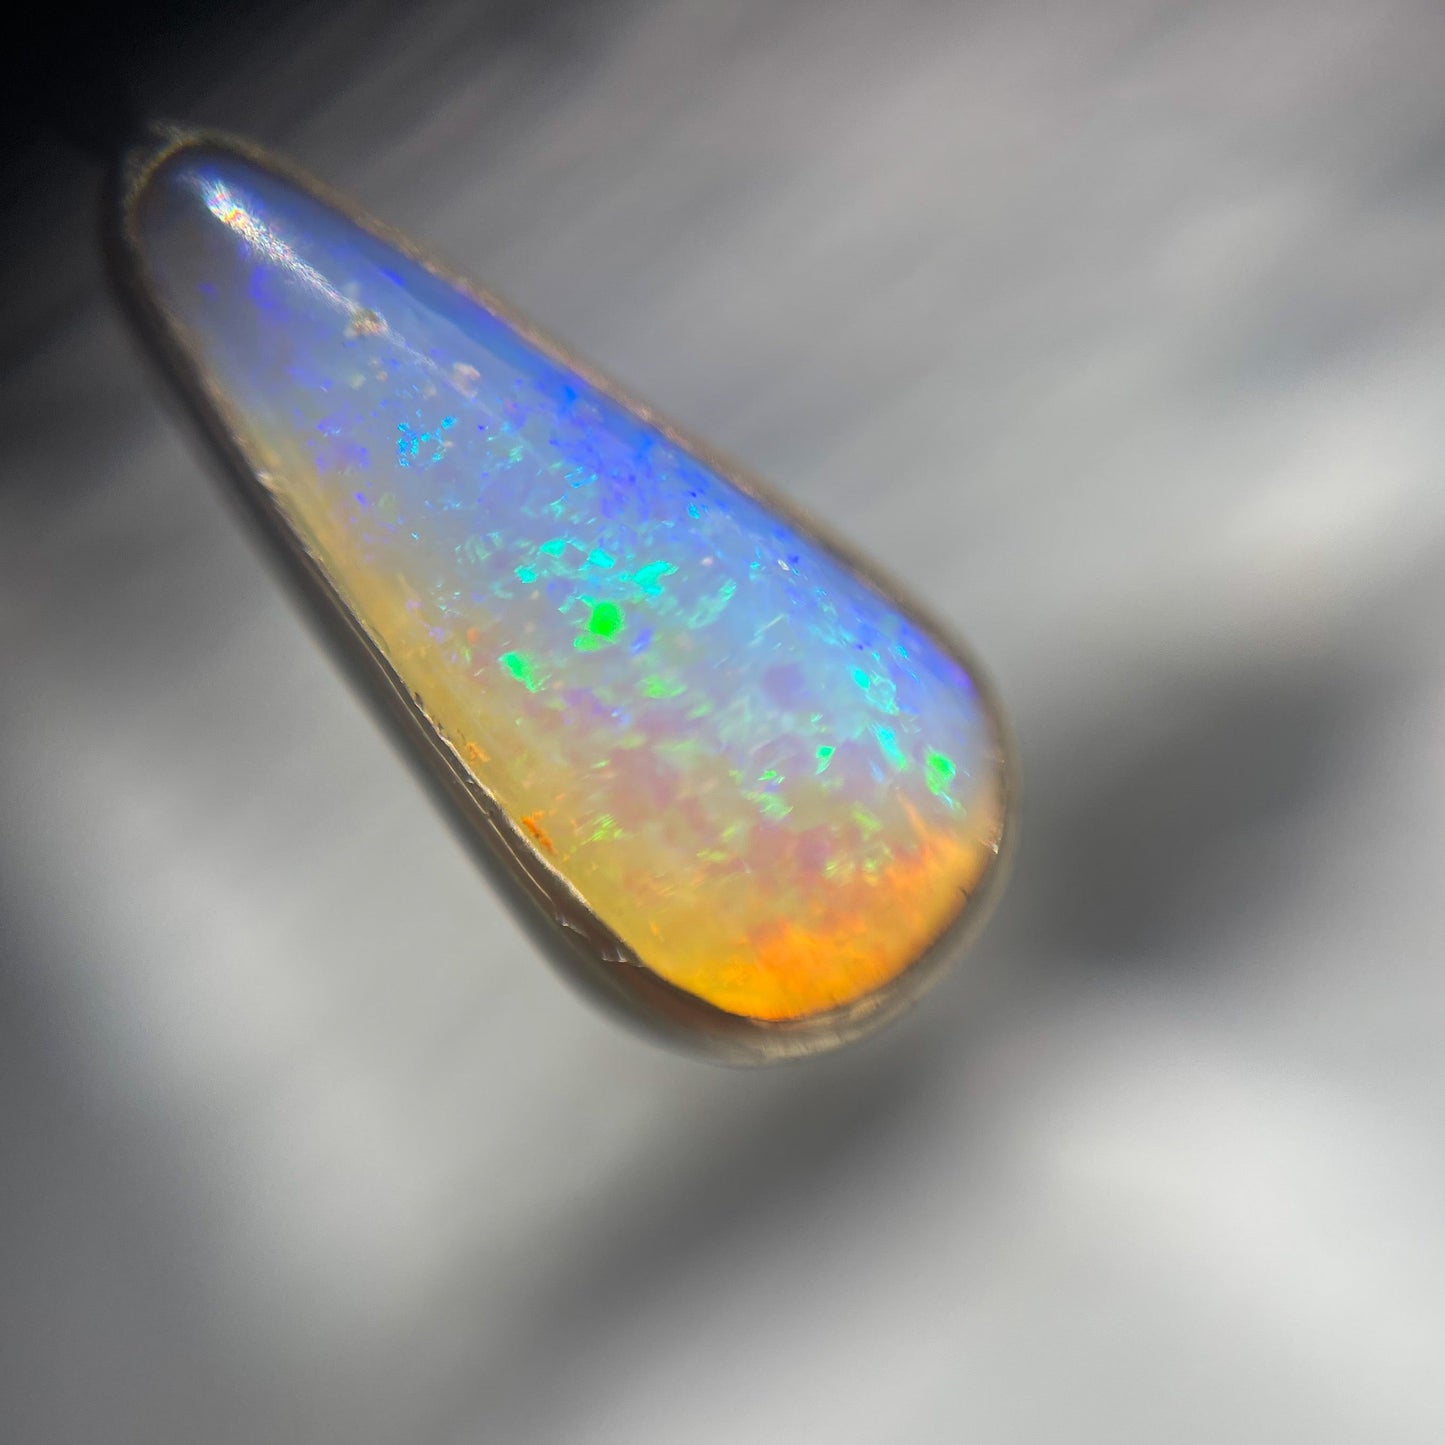 Australian Opal Necklace by NIXIN Jewelry shown under magnification. Real opal necklace.